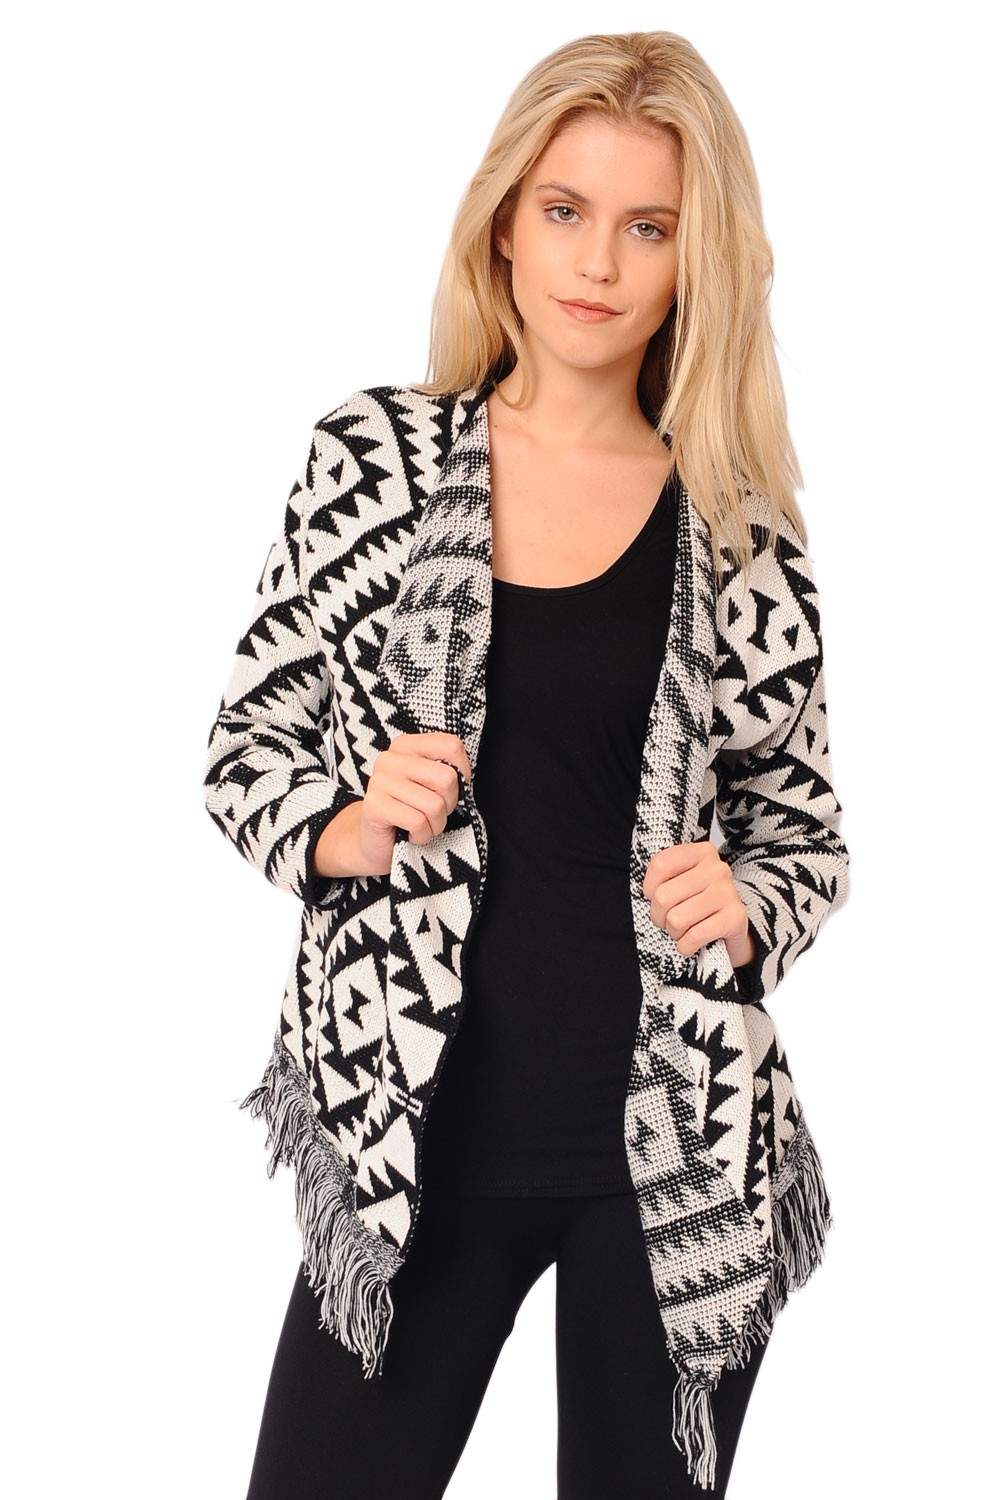 Frankie Aztec Waterfall Cardigan in Black and White | iCLOTHING